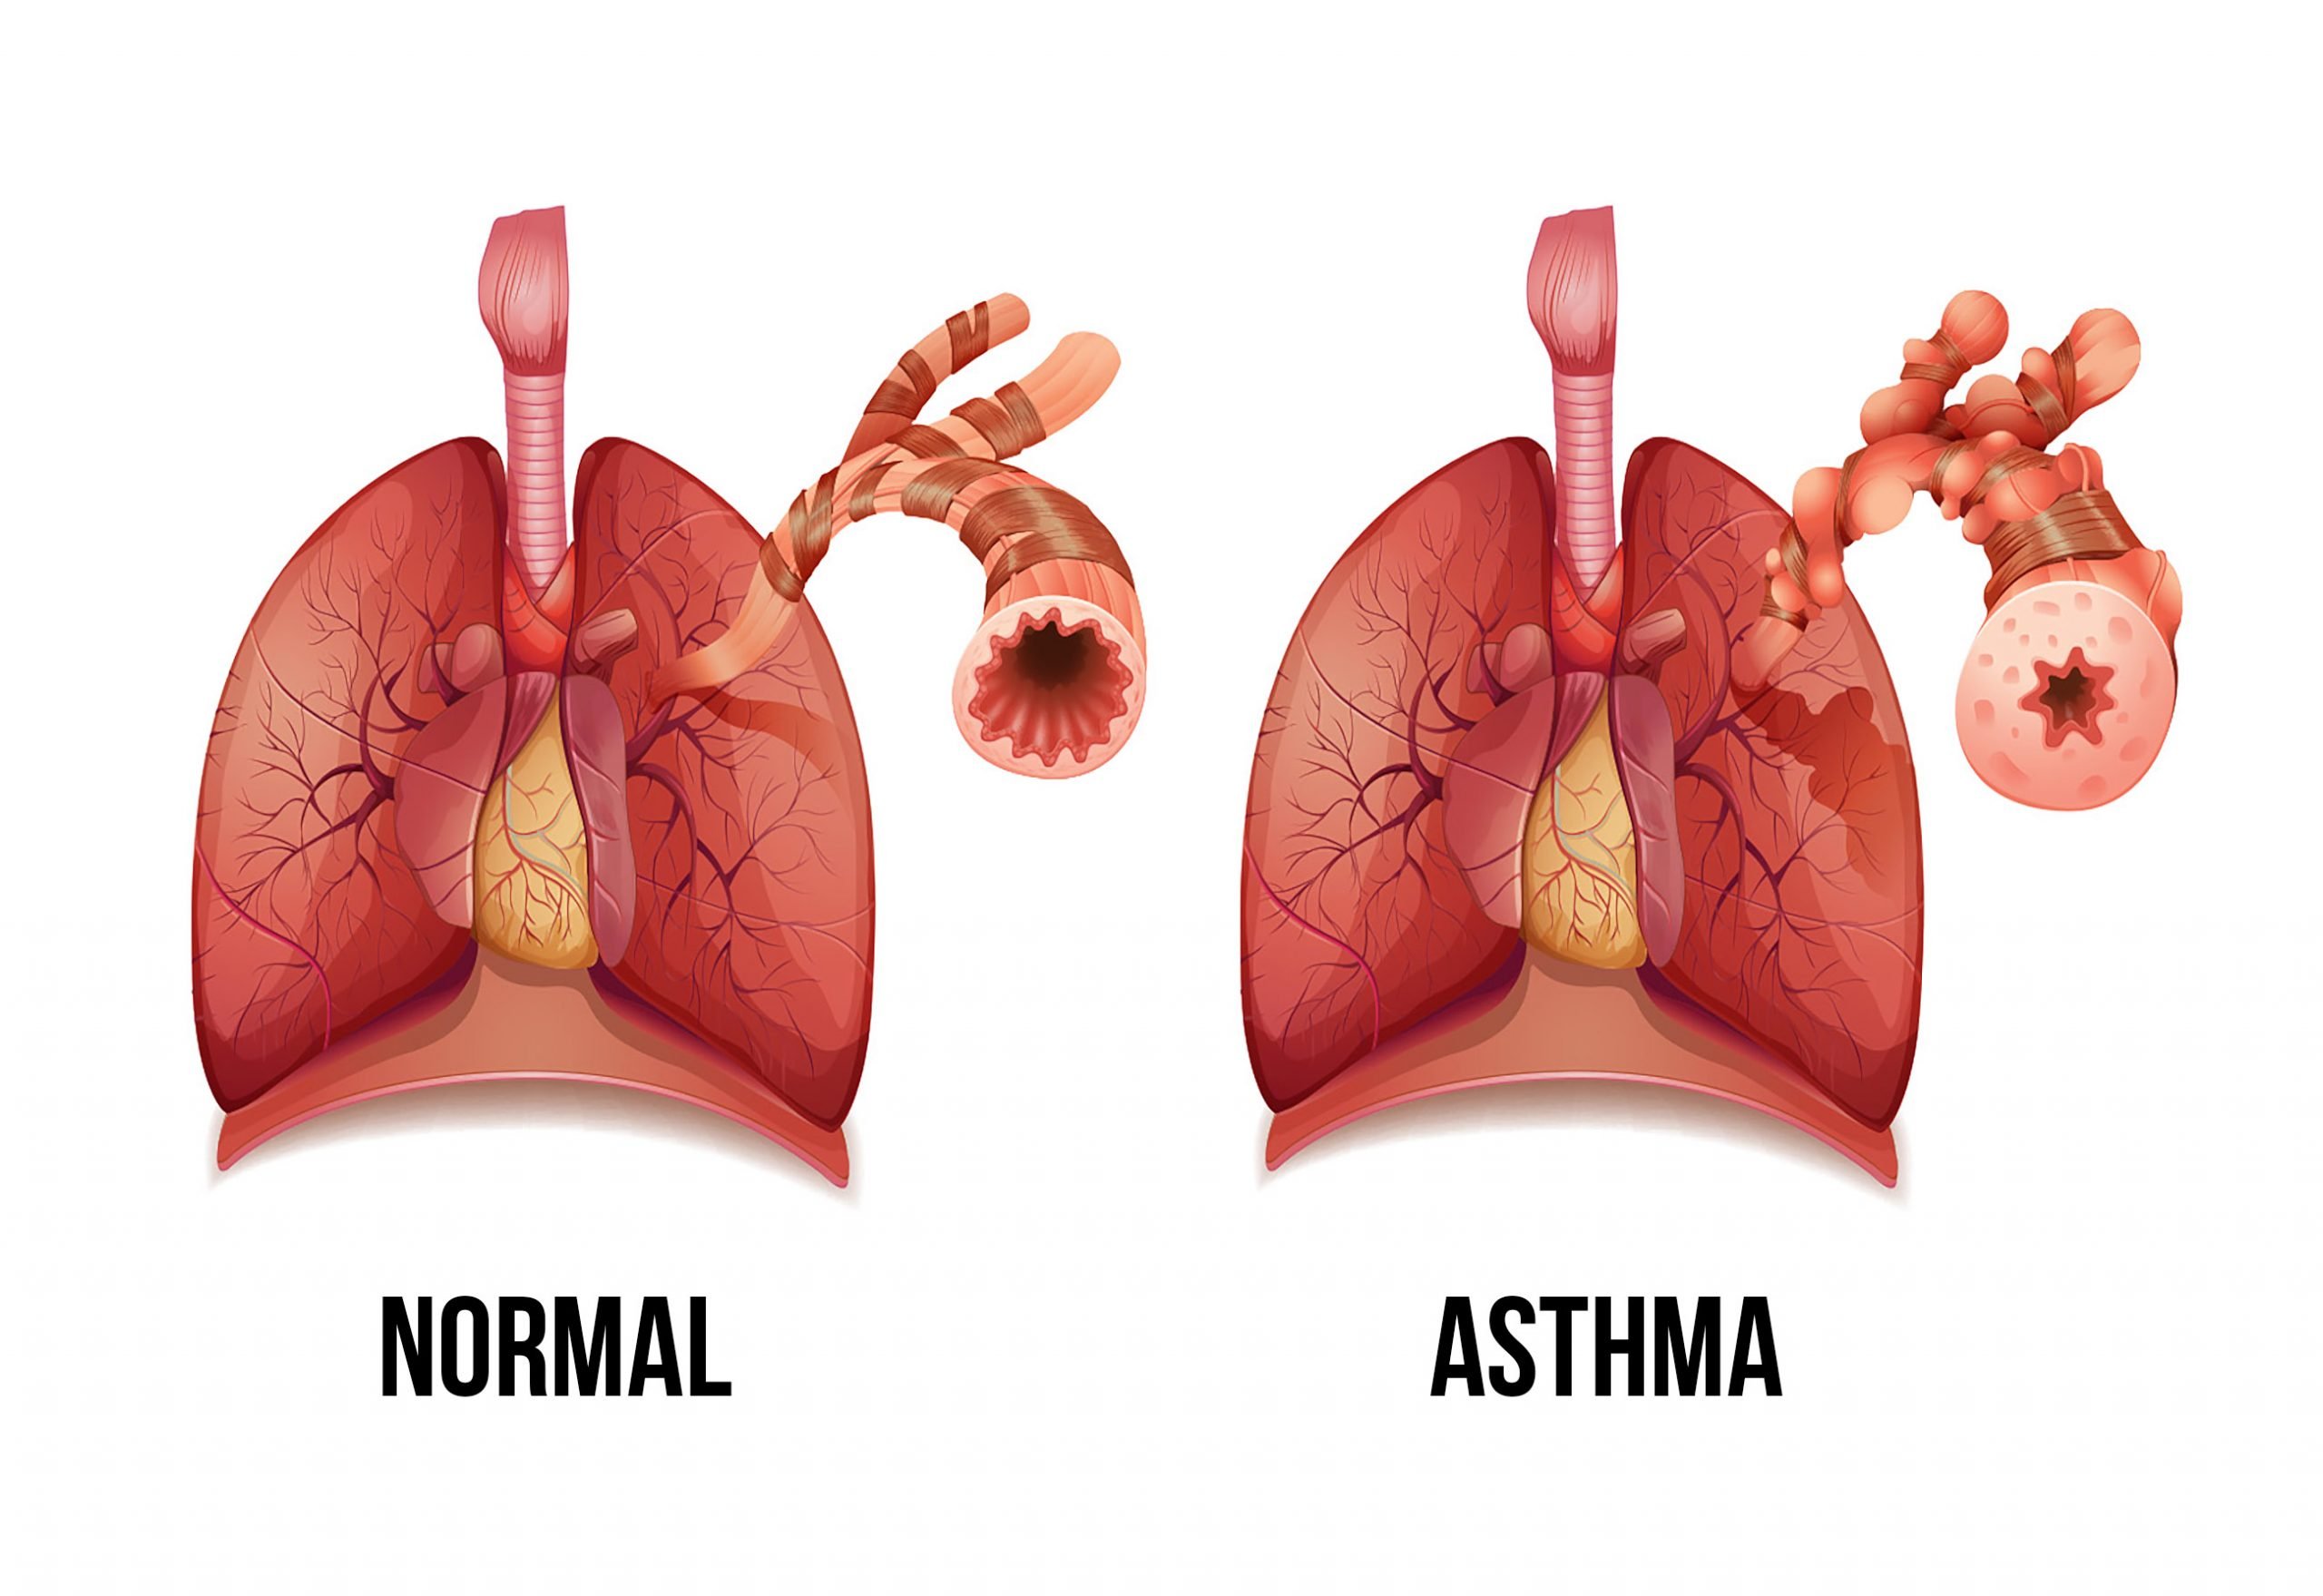 Top 6 benefits of cannabis for asthma